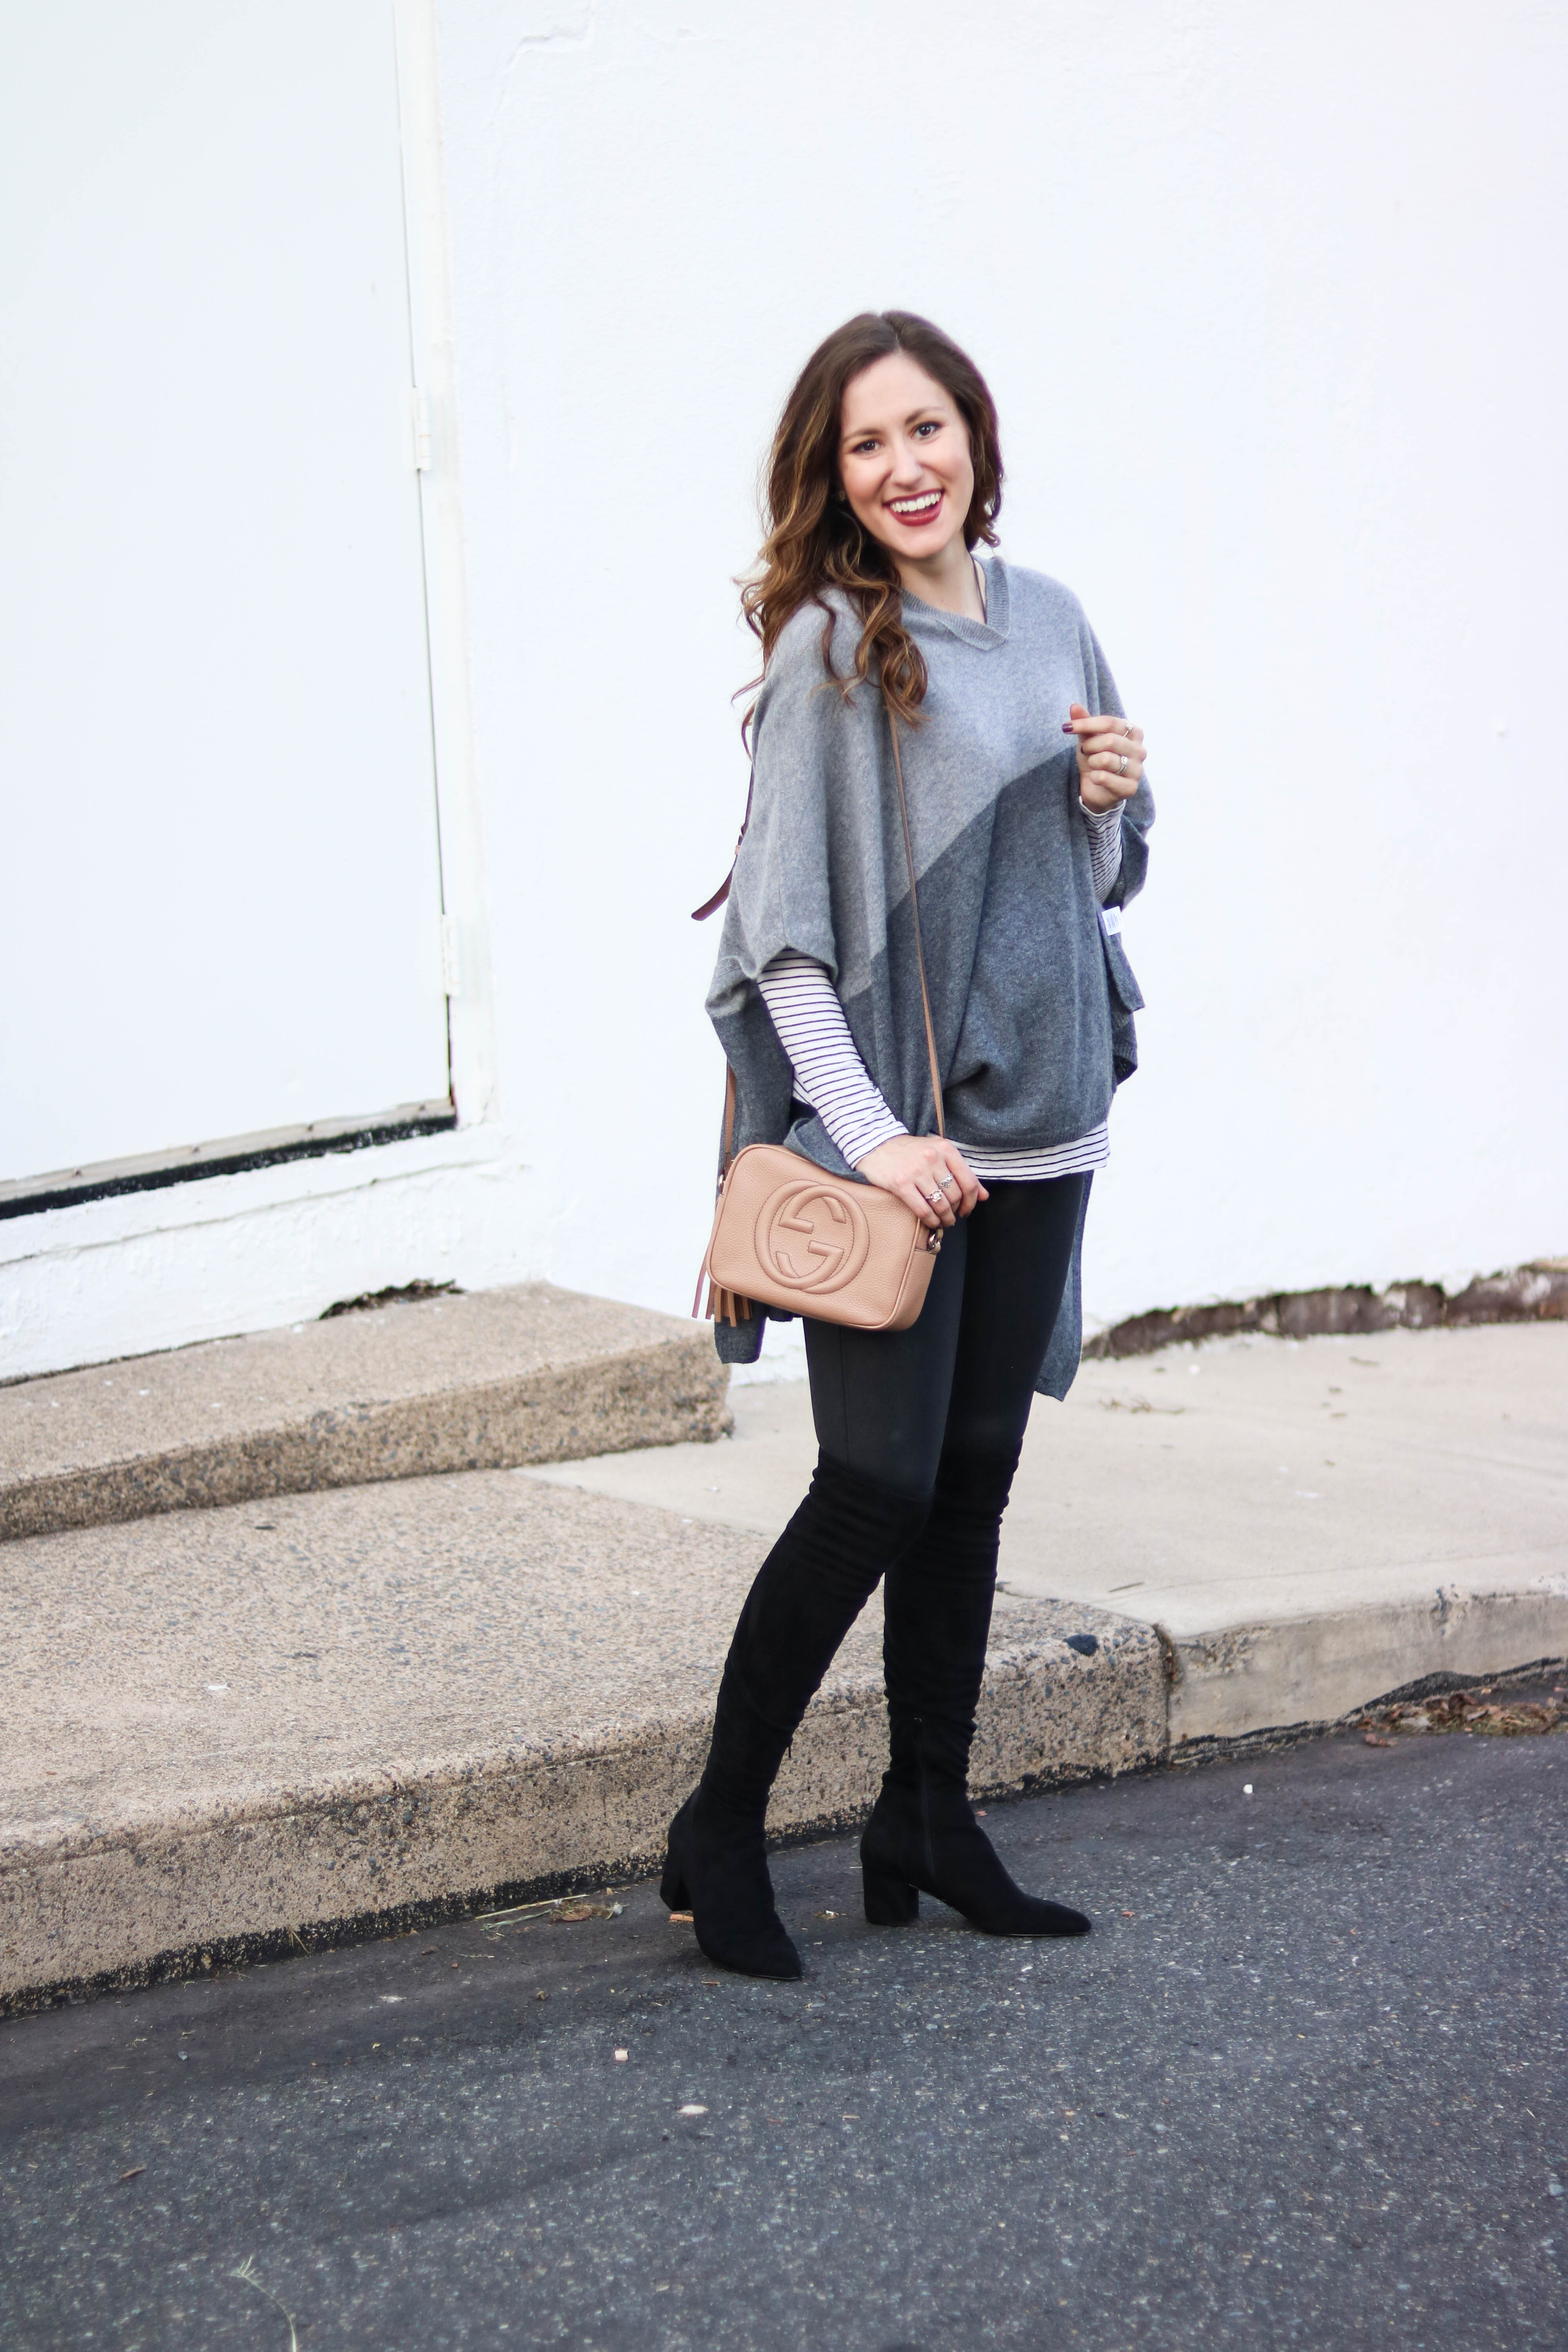 Leather Leggings Lookbook: 6 Ways to Style Leather Leggings, on Coming Up Roses